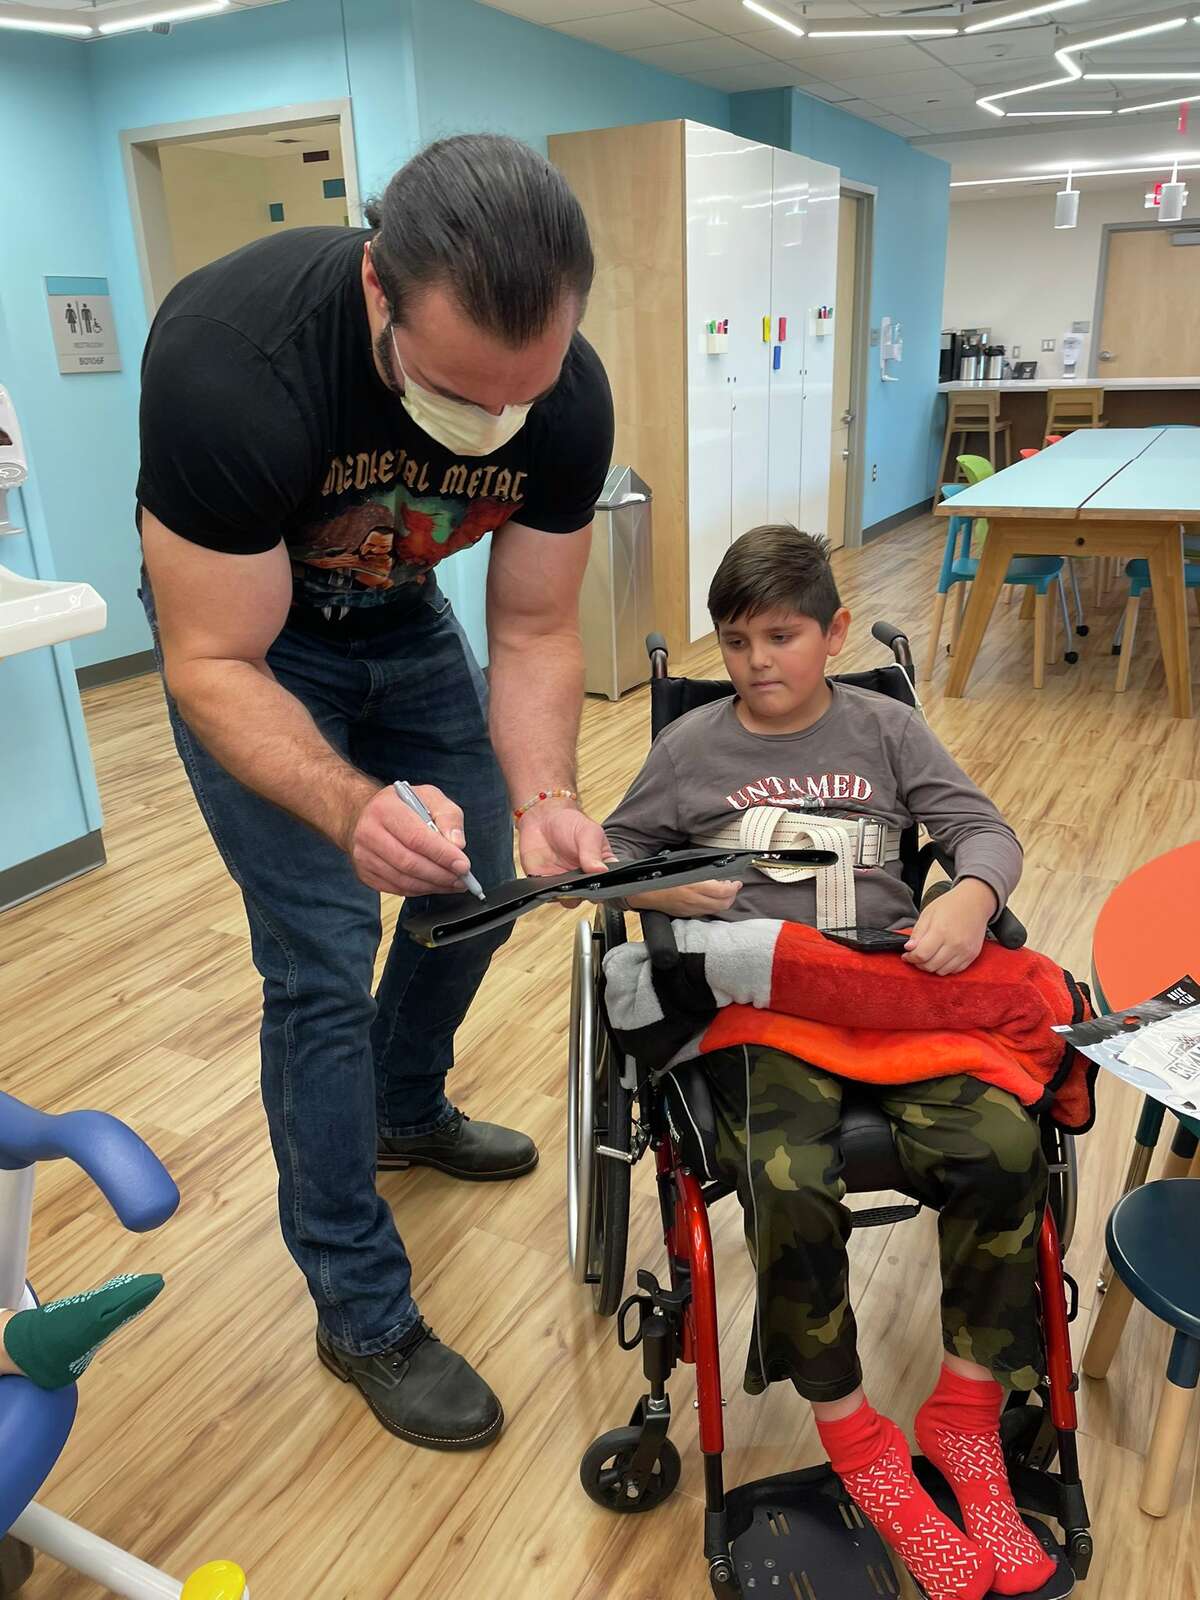 MySA recently interviewed WWE Superstar Drew McIntyre when he was in town to promote the 2023 Royal Rumble, which will be held at the Alamodome on Jan. 28, and visit The Children's Hospital of San Antonio.